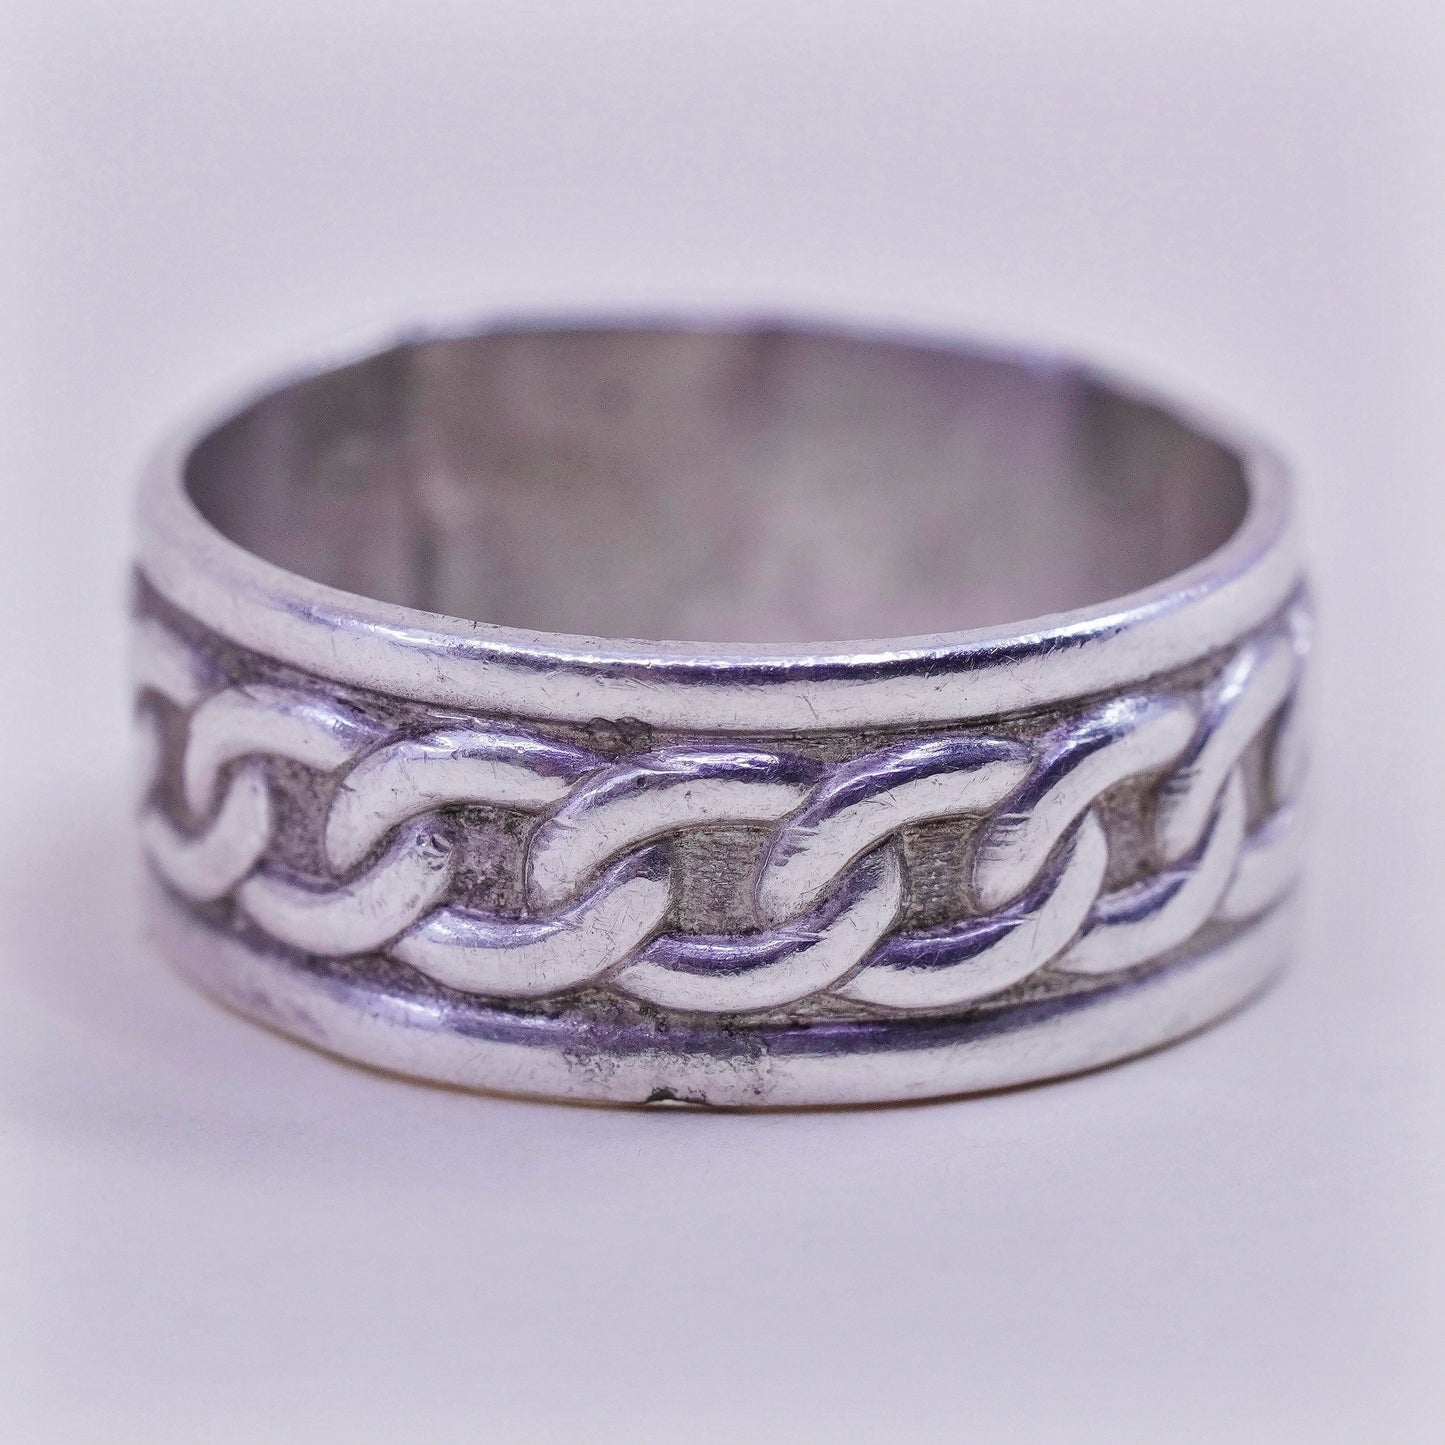 Size 7, vintage sterling silver handmade ring, 925 chain textured band